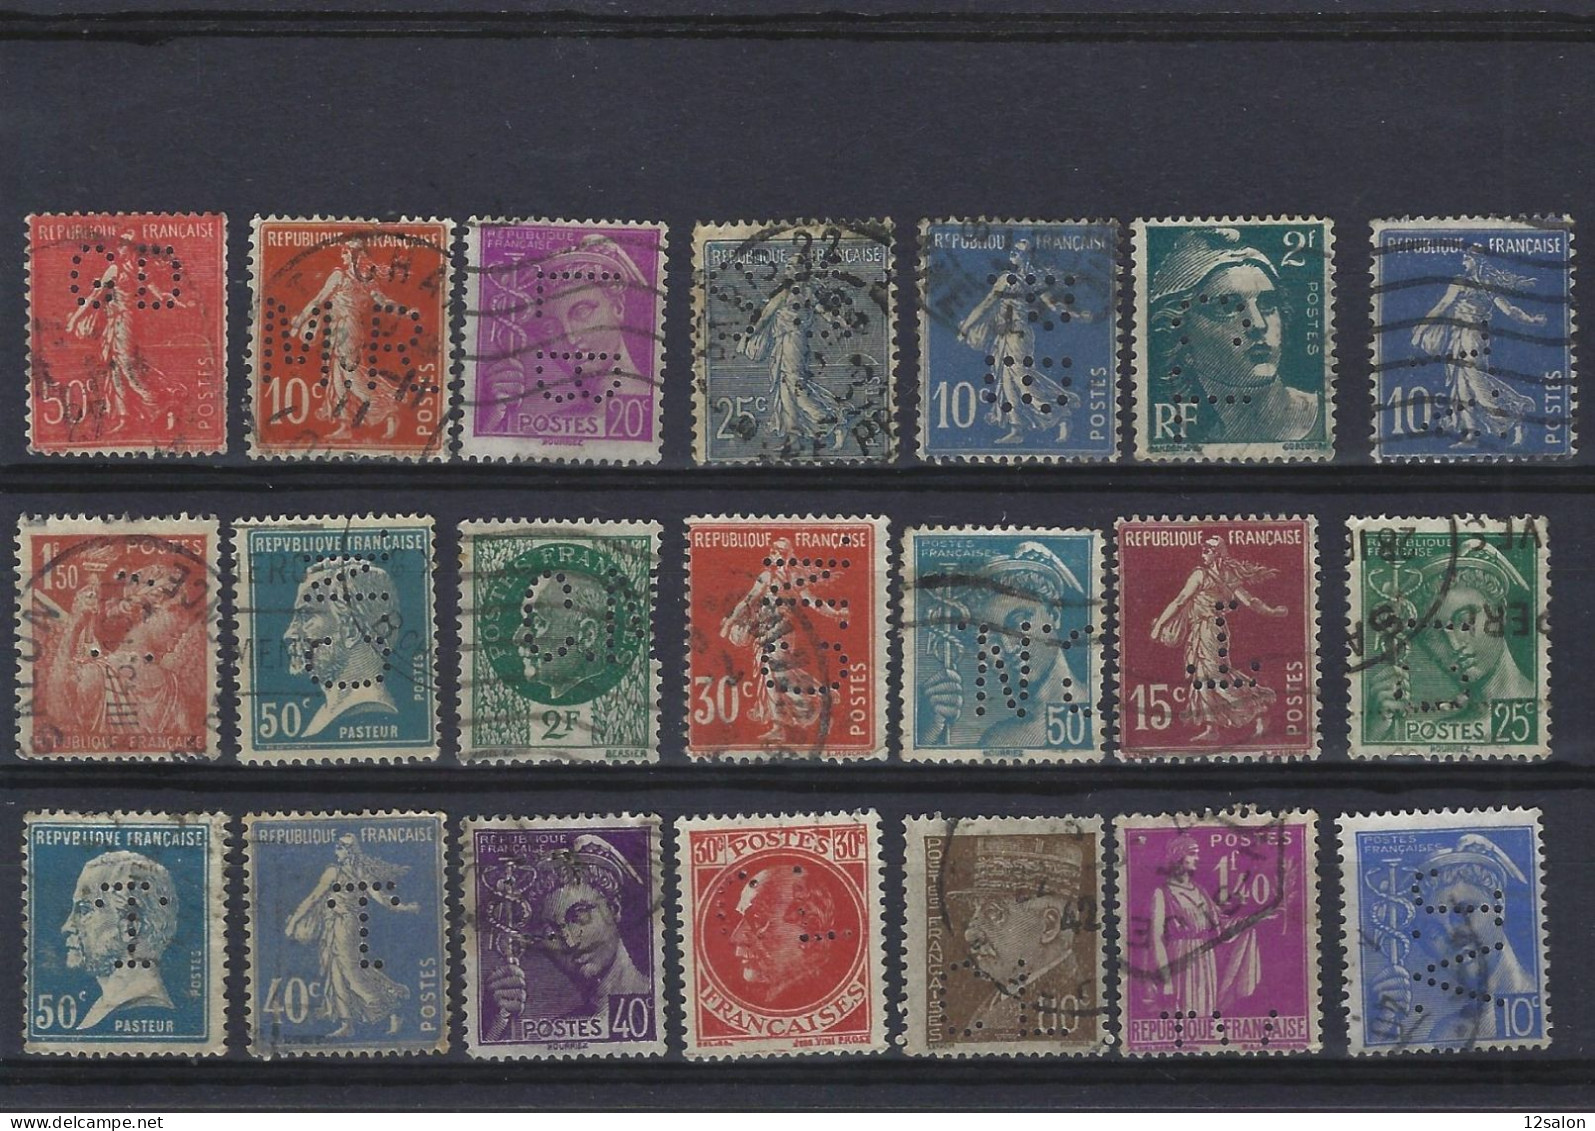 FRANCE TIMBRE LOT 2 PERFORE PERFORES PERFIN PERFINS PERFO PERFORATION PERFORIERT - Gebruikt